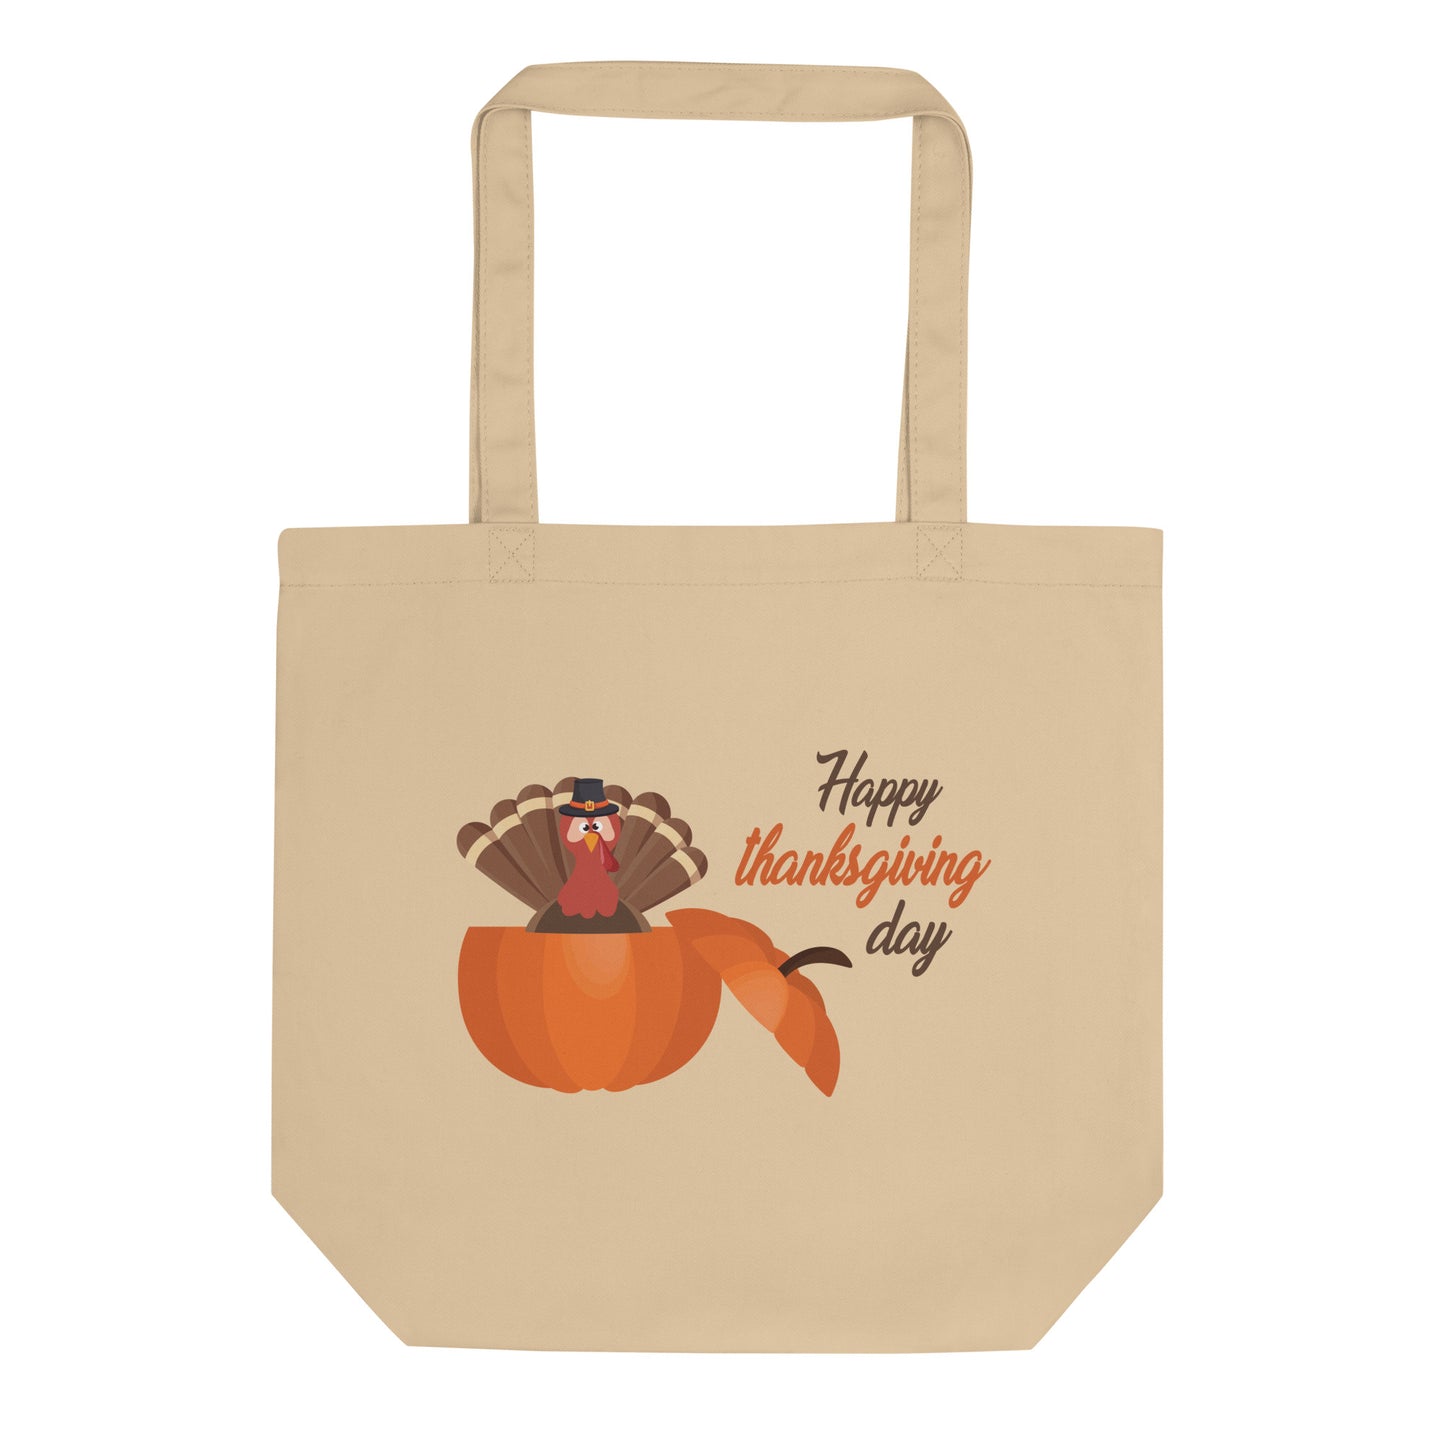 Happy Thanksgiving Day Eco Tote Bag